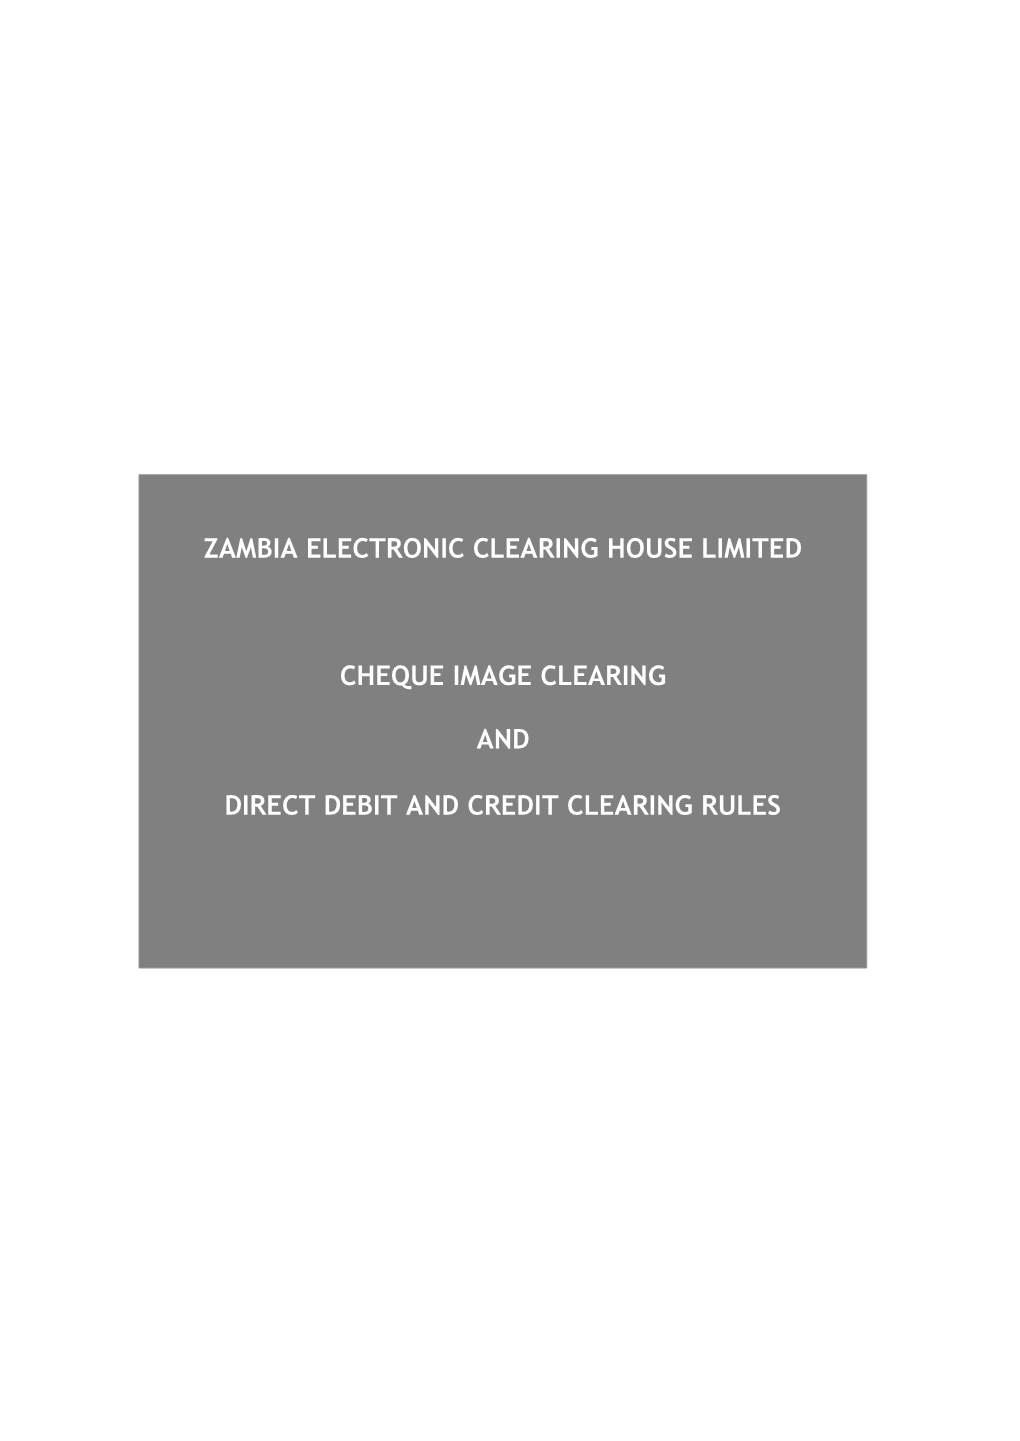 Zambia Electronic Clearing House Limited Cheque Image